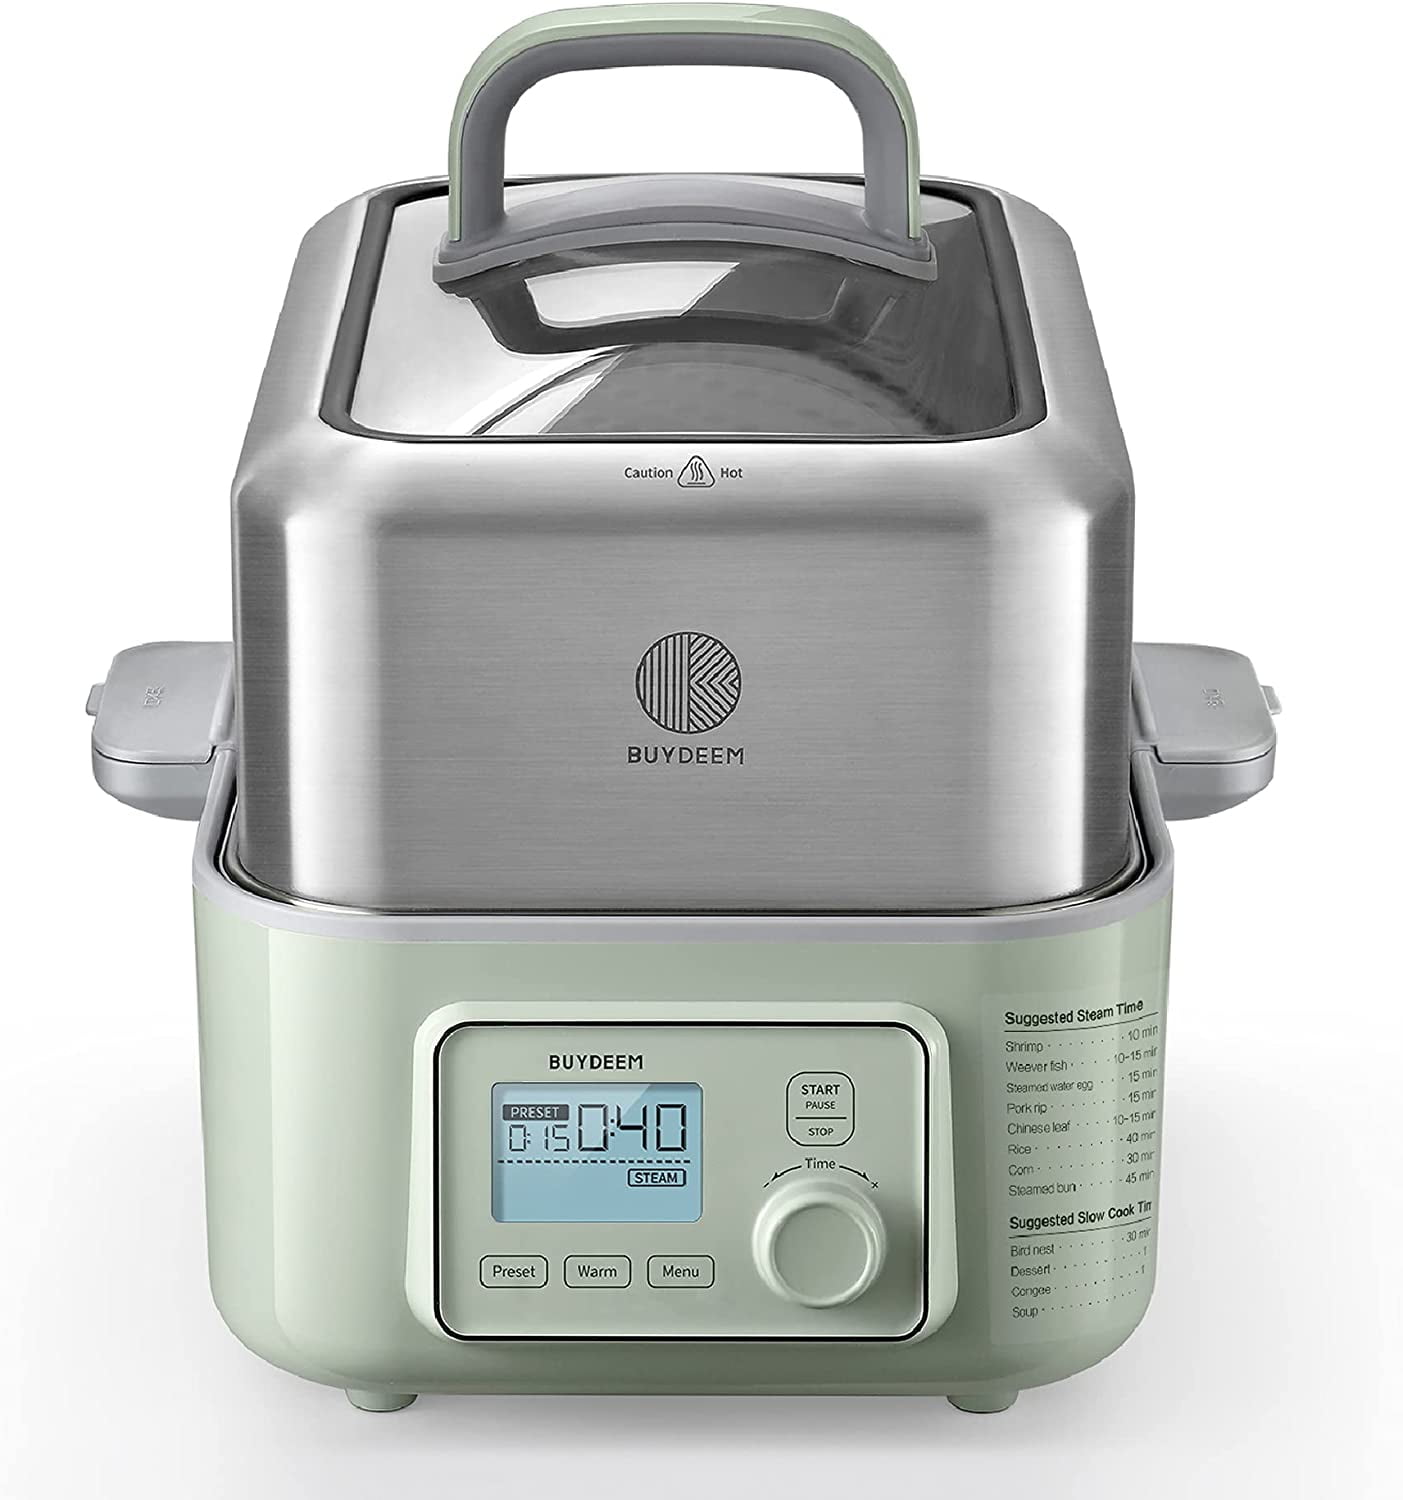 BUYDEEM G563-A501 Electric Food Steamer for Cooking, 2 Tire Stainless Steel  Steamer with Slow Cook Mode, 1500W, 10-Quart, Green